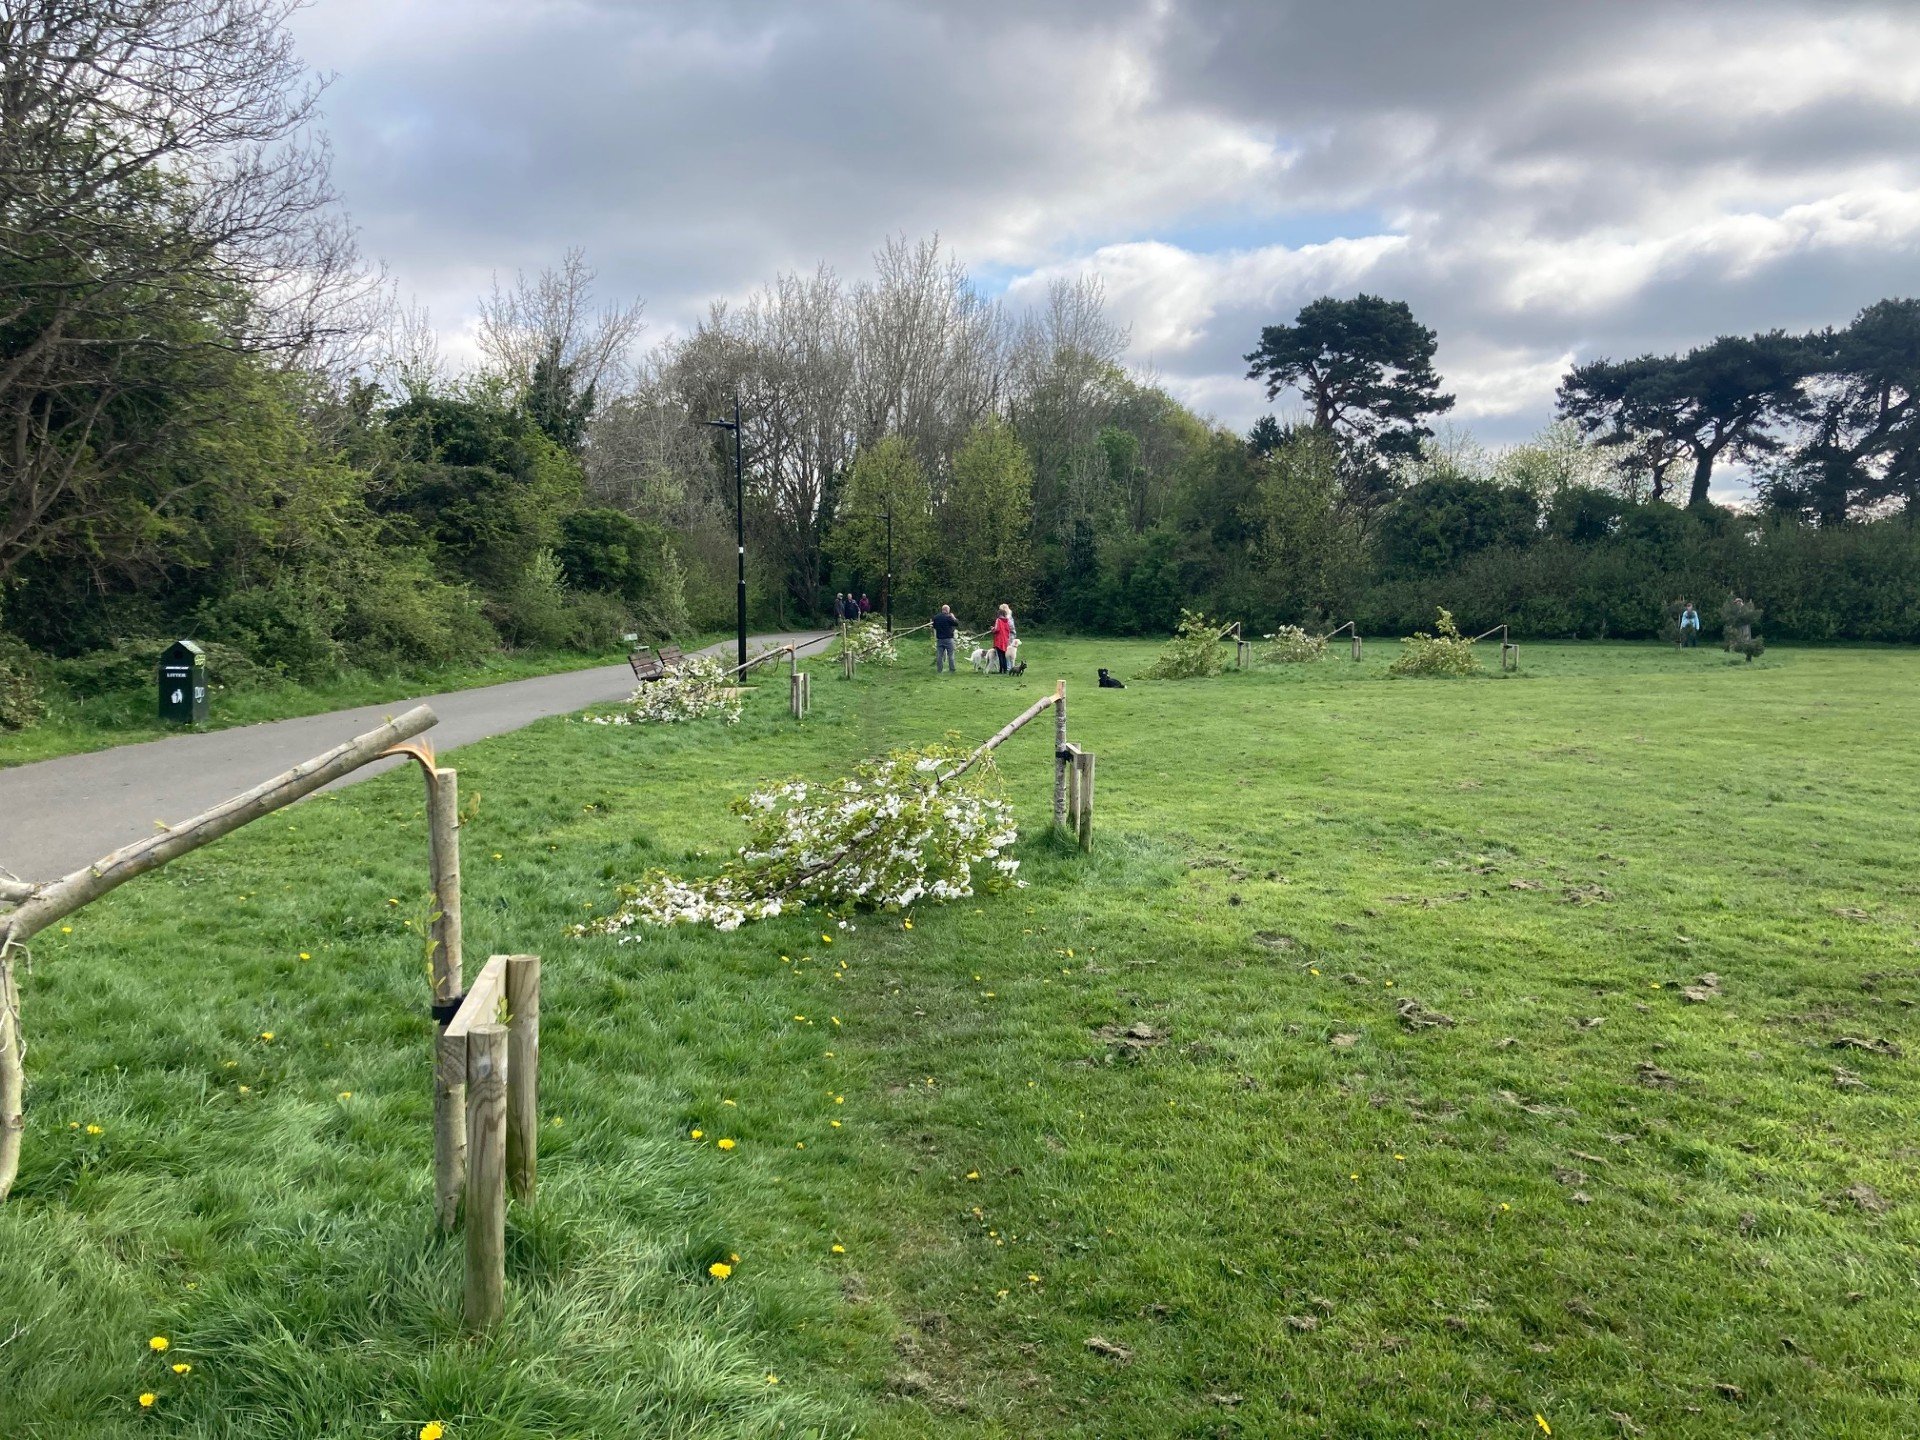 Trees chopped down in act of vandalism in Dodder Valley Park in Dublin